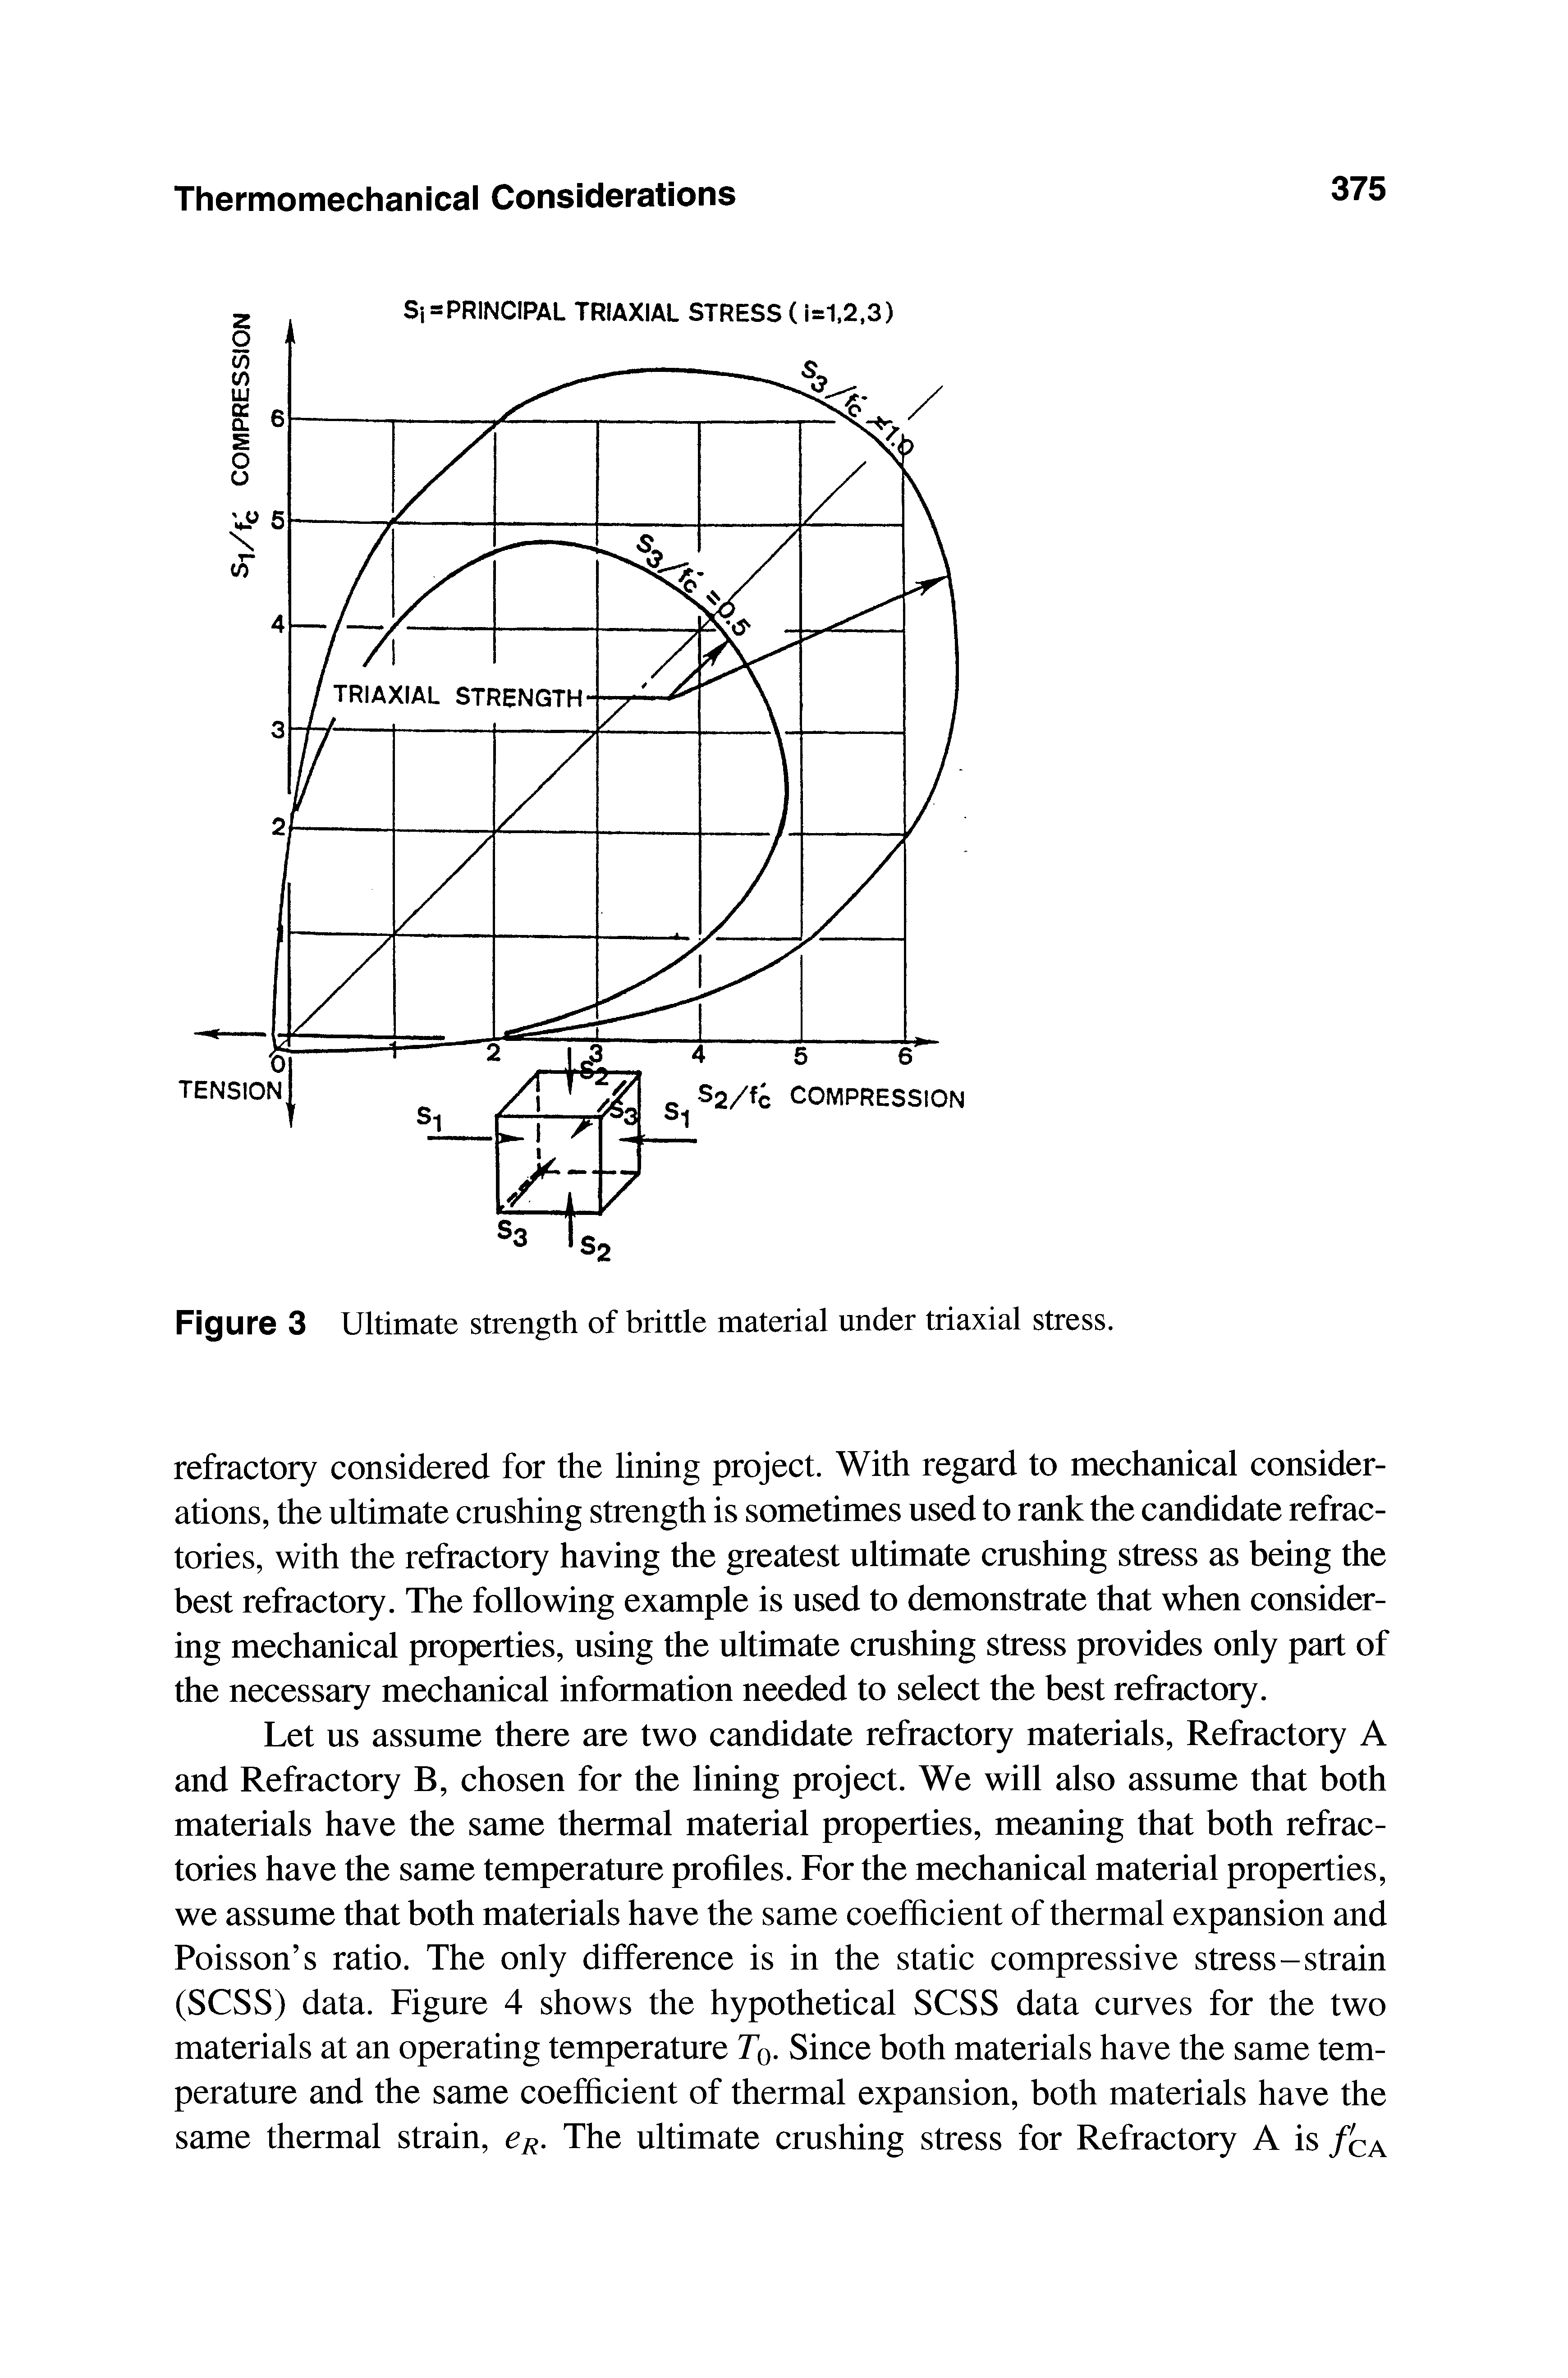 Figure 3 Ultimate strength of brittle material under triaxial stress.